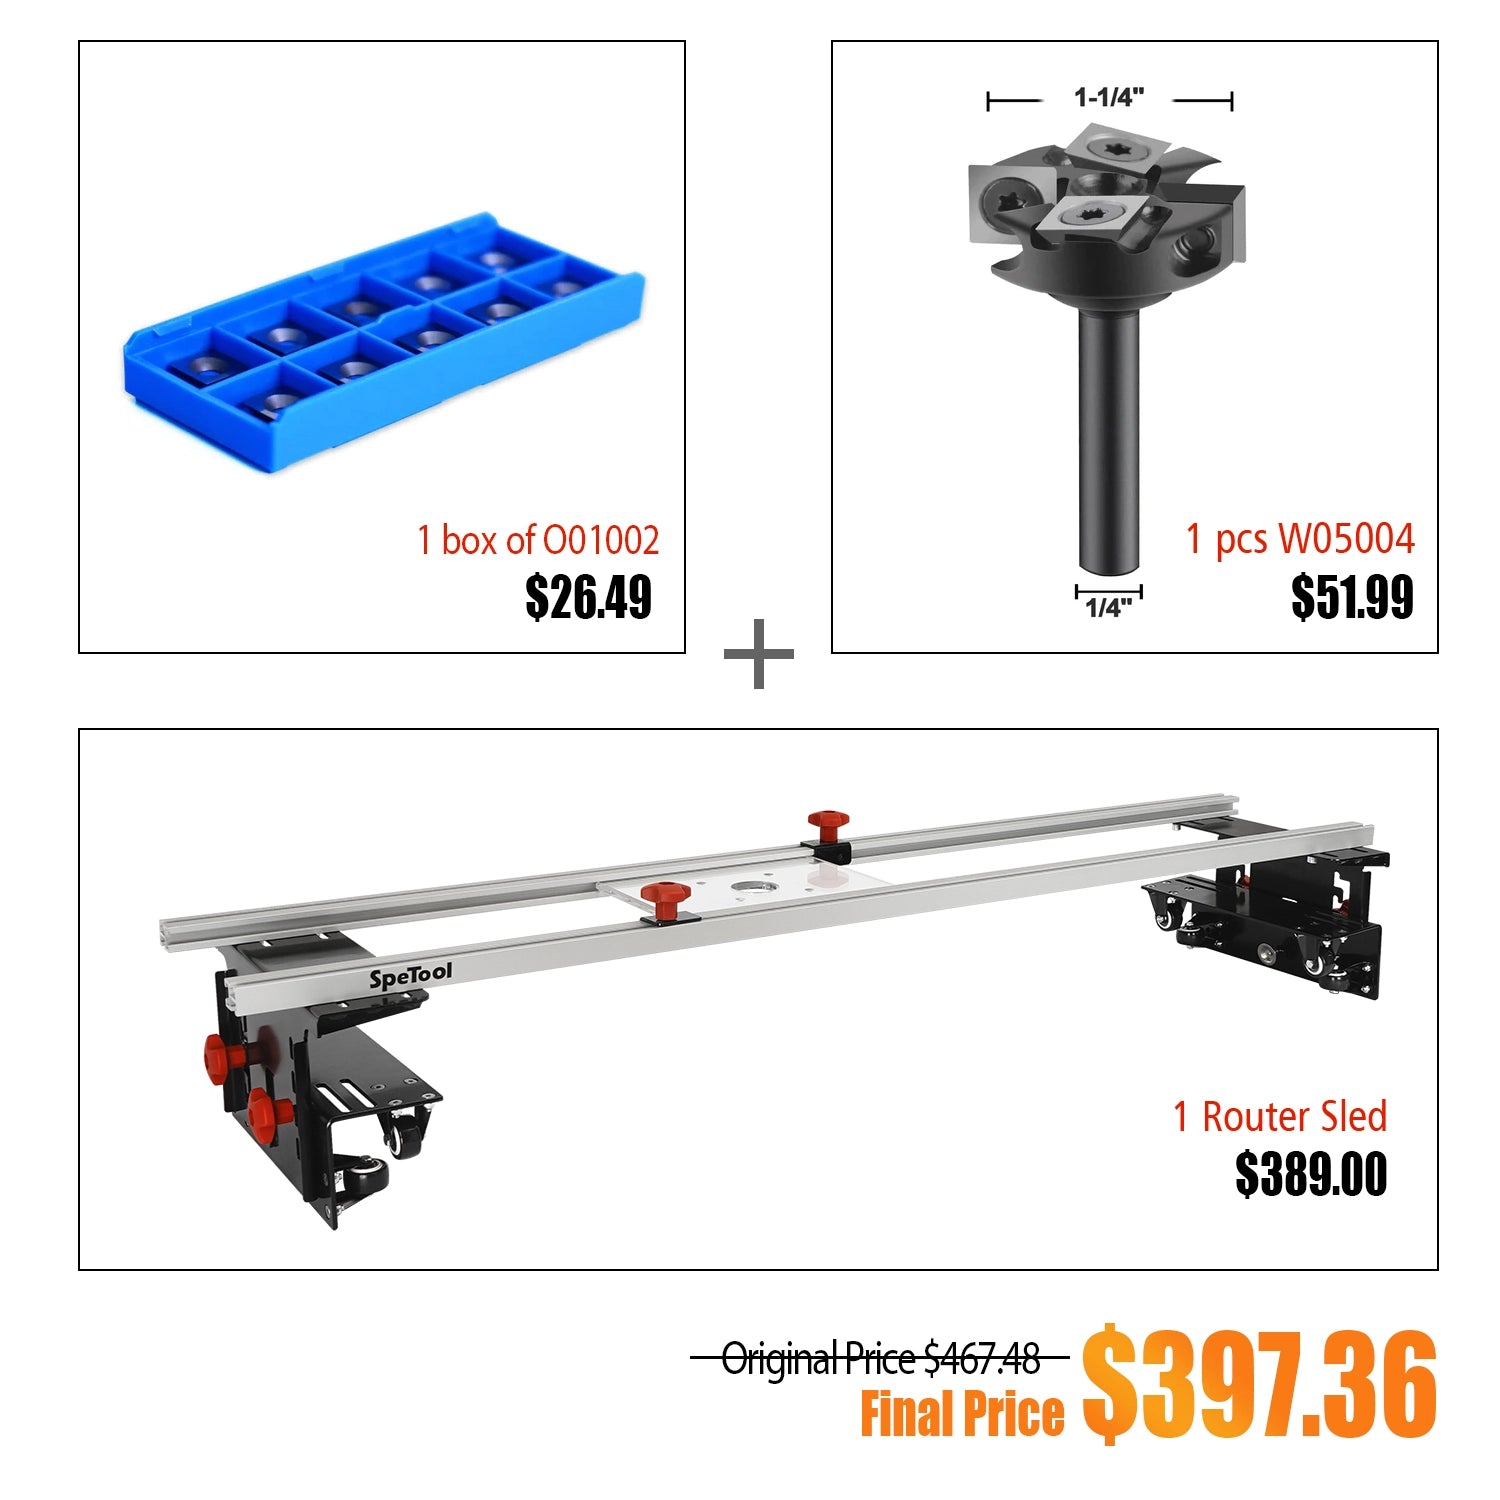 !!!【Pre-ordering】Bundle buying Save Up To $74 | SpeTool Cratos S01001 Machinist-Grade Router Sled & Spoilboard Surfacing Bits & Carbide Insert Kits-5